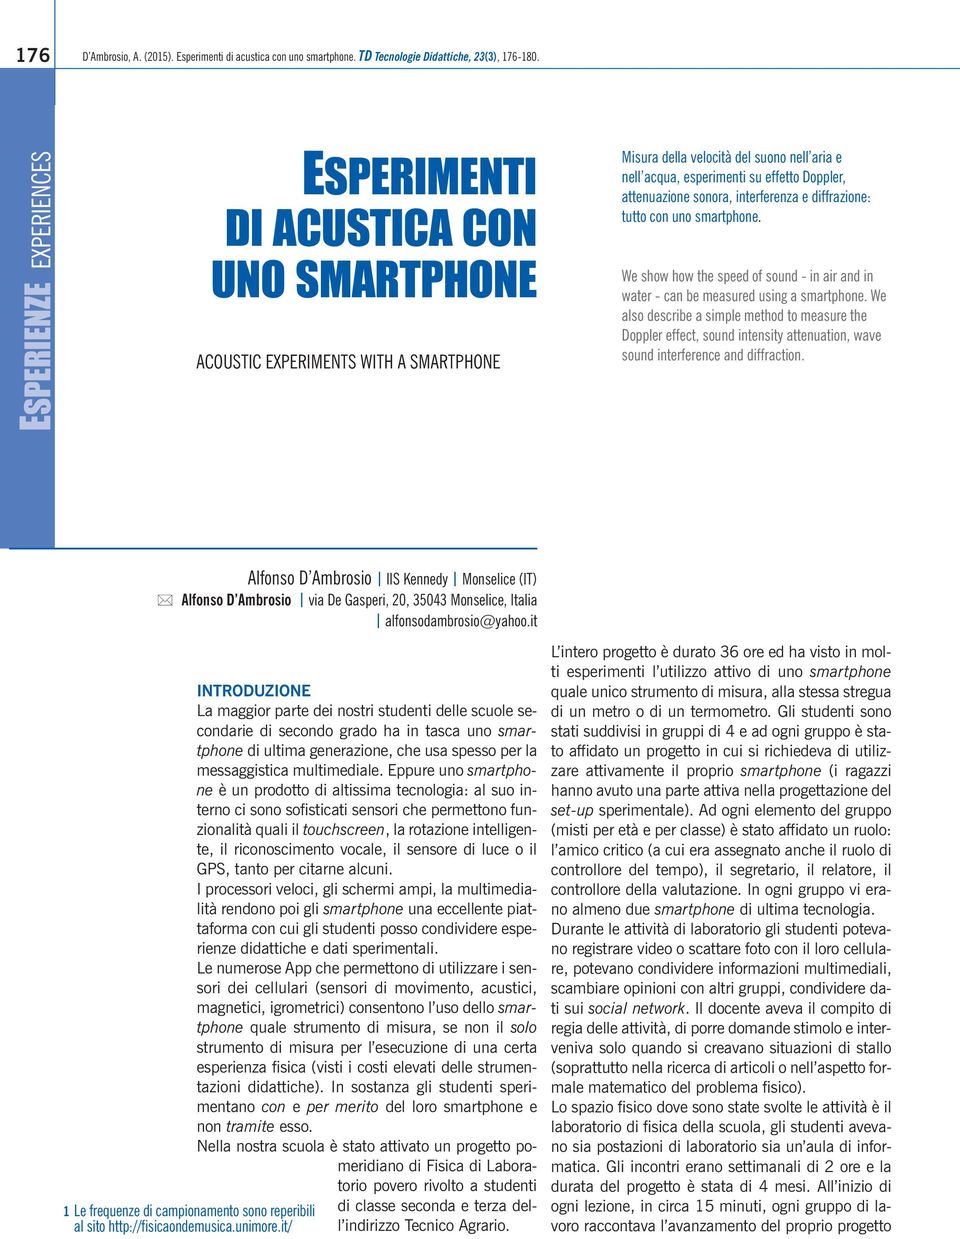 sonora, interferenza e diffrazione: tutto con uno smartphone. We show how the speed of sound - in air and in water - can be measured using a smartphone.